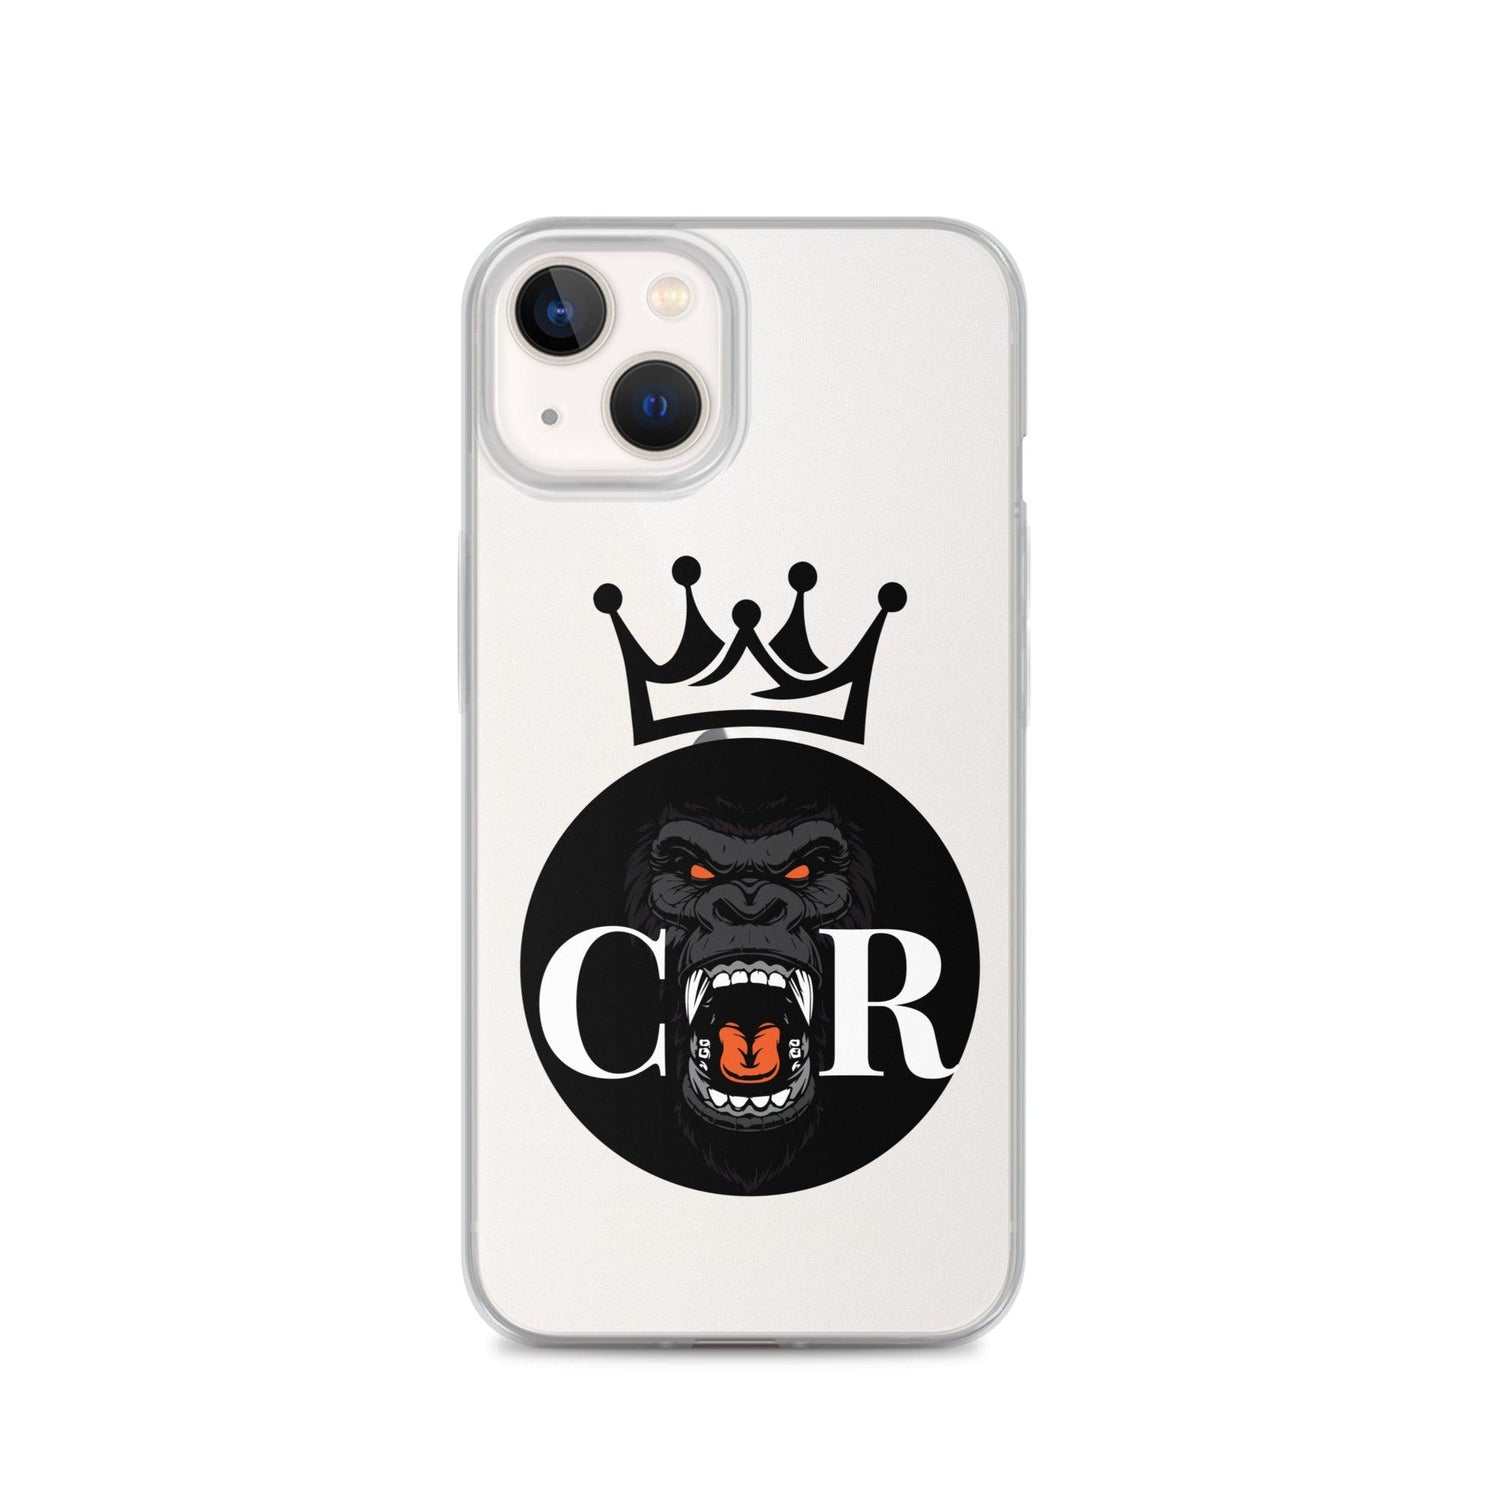 Chris Royster "Crowned" iPhone Case - Fan Arch